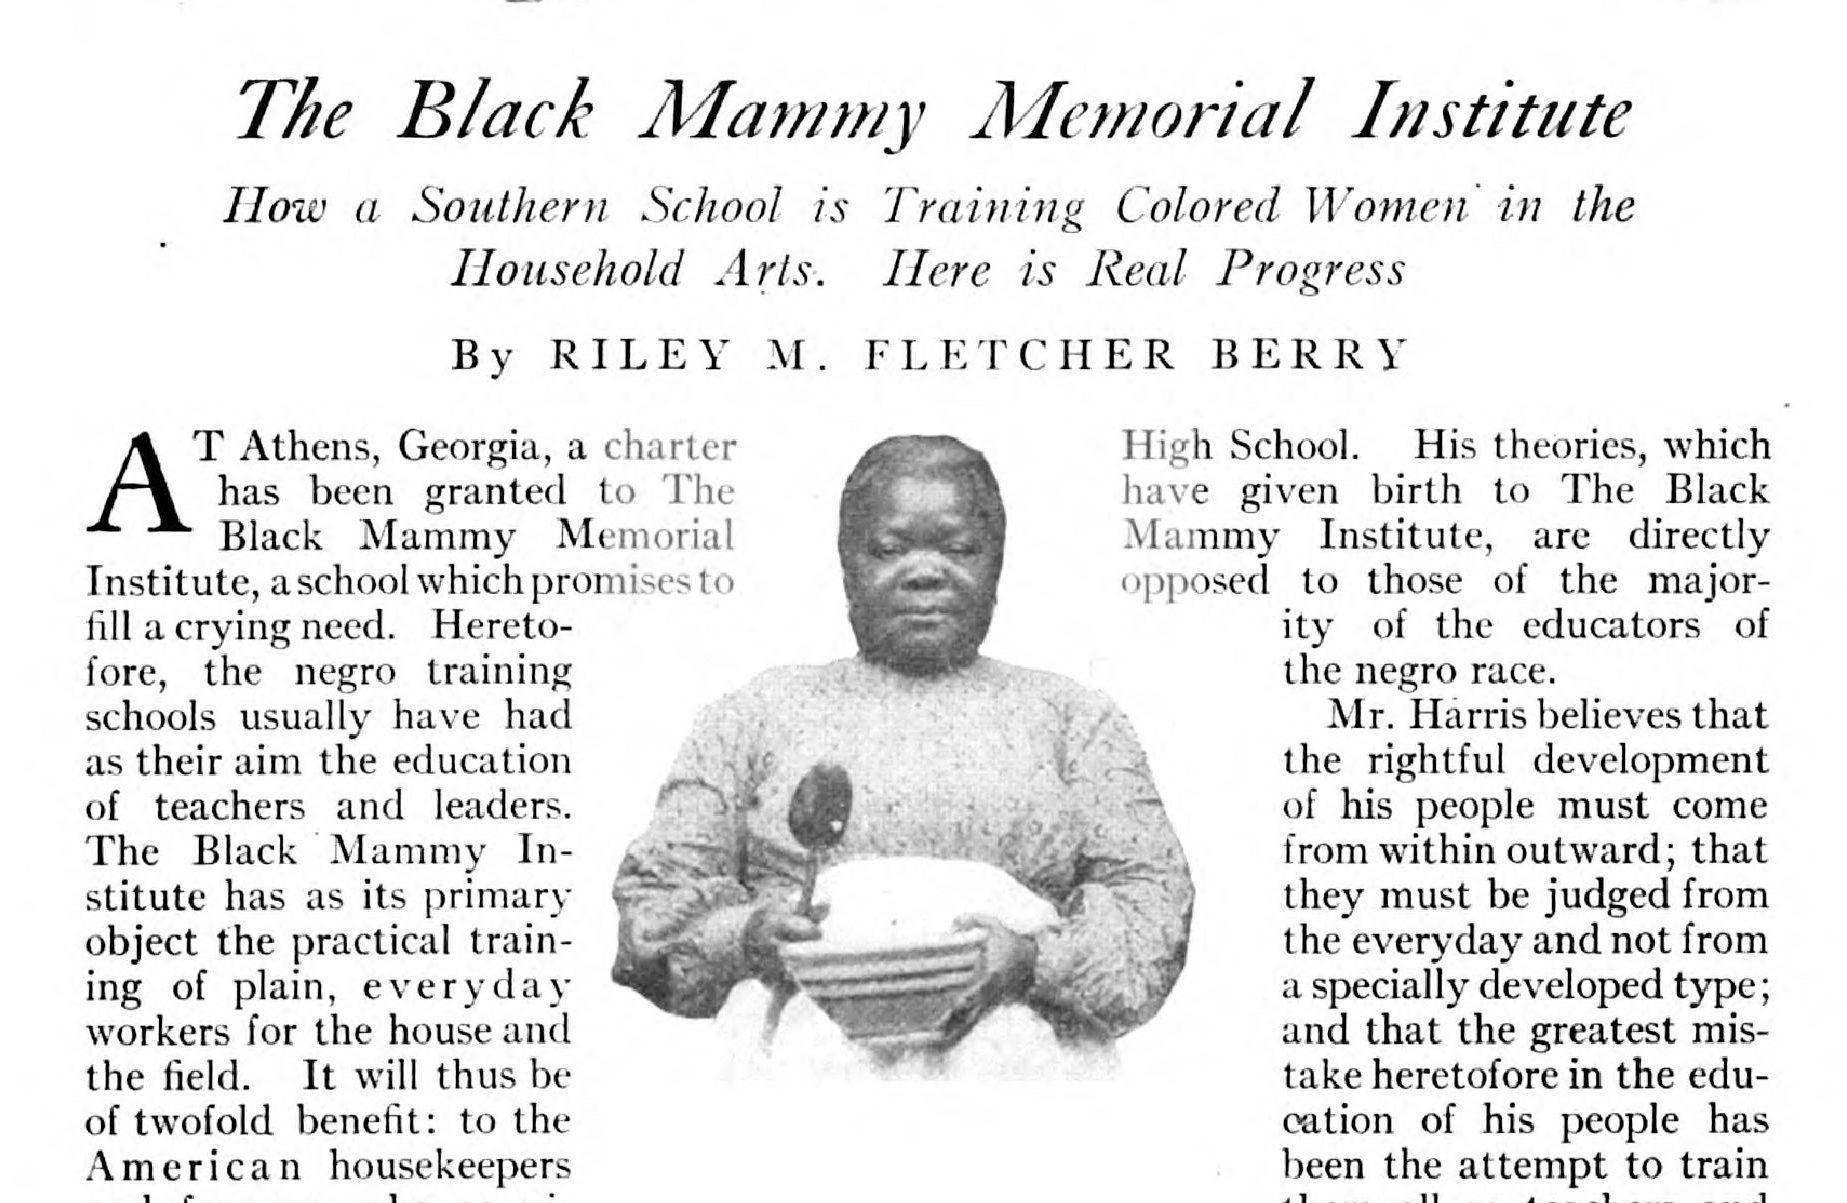 Magazine pages from Good Housekeeping titled "The Black Mammy Memorial Institute"